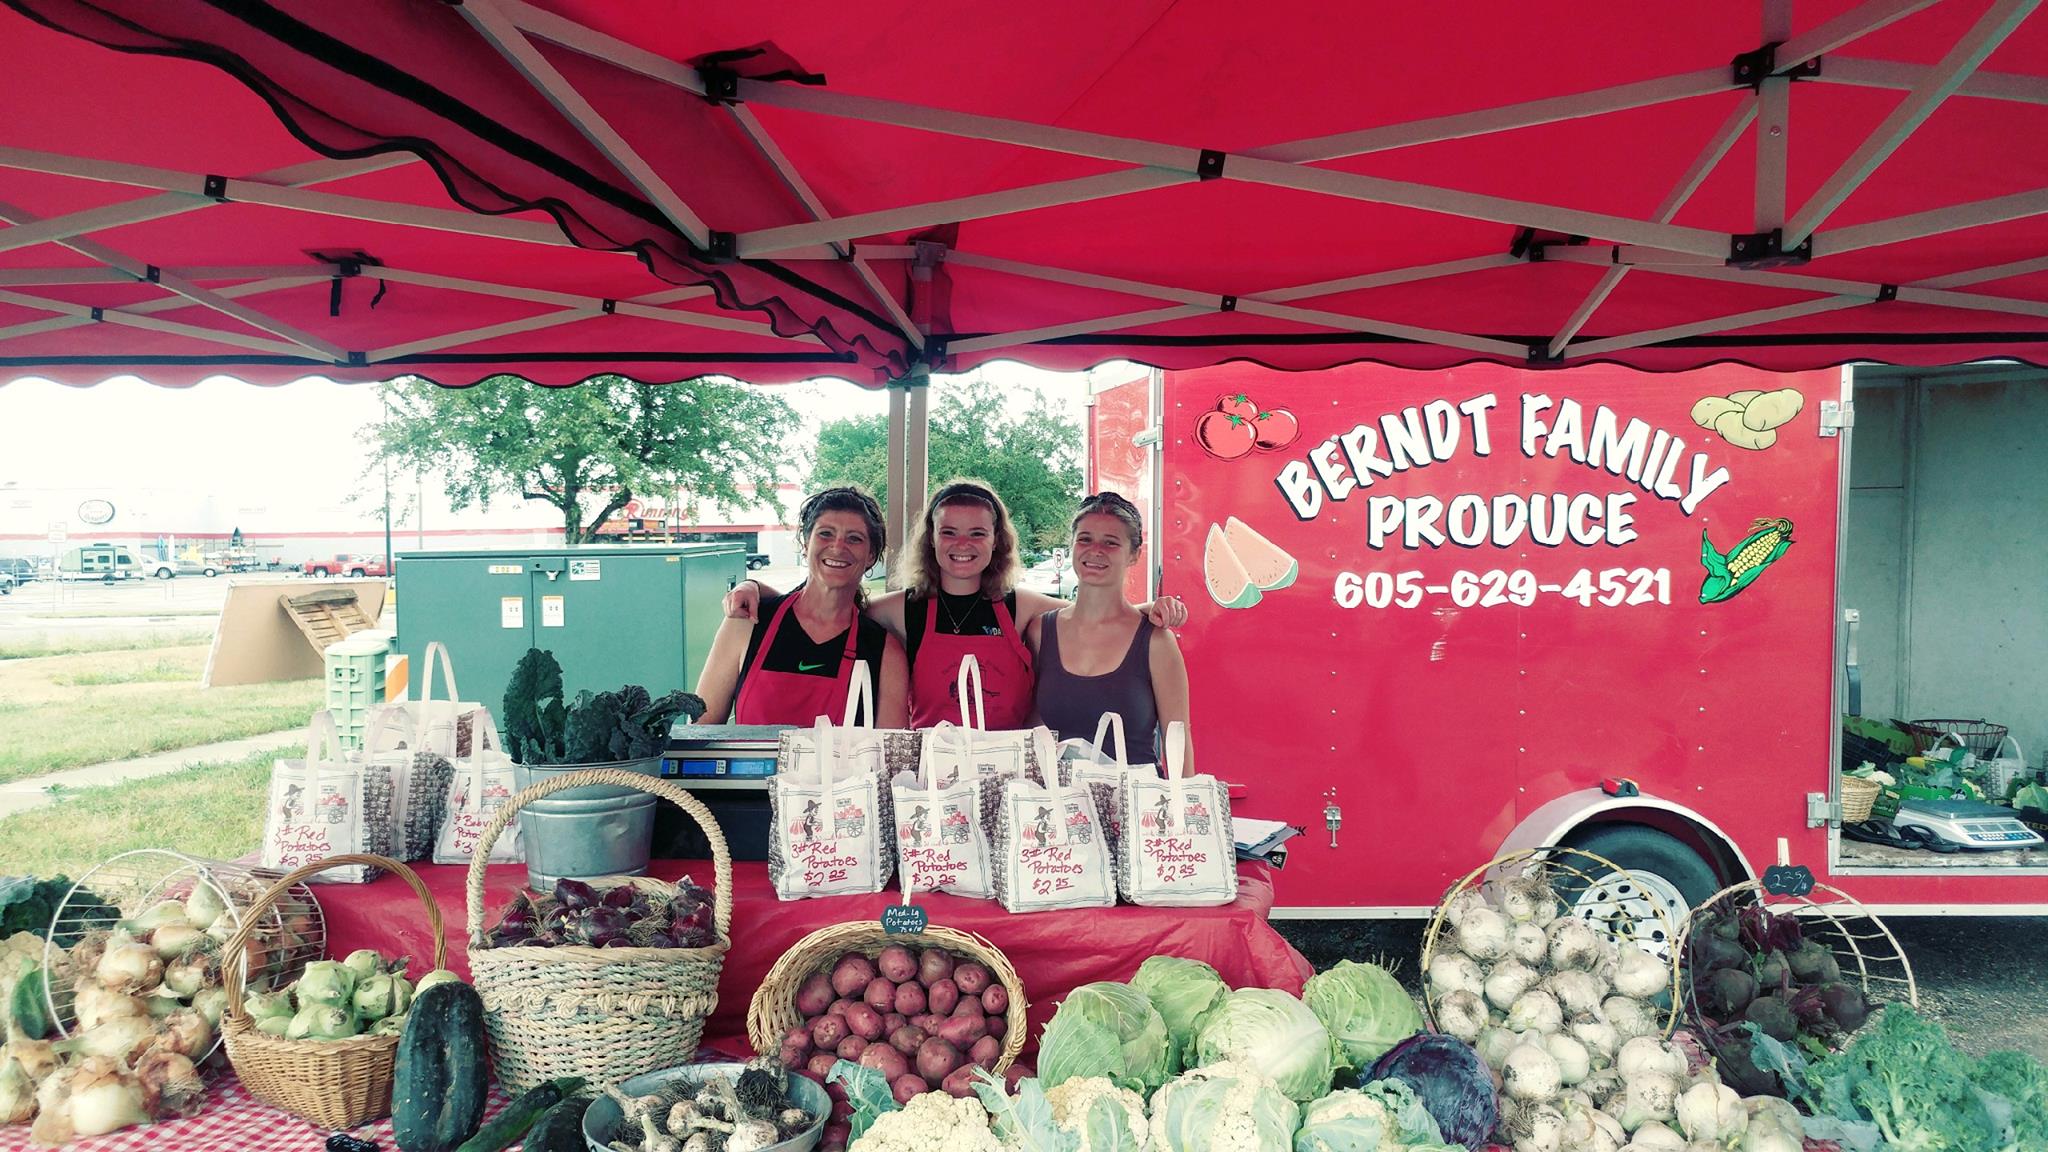 Dawnna Berndt and staff in front of their vegetable farm stand